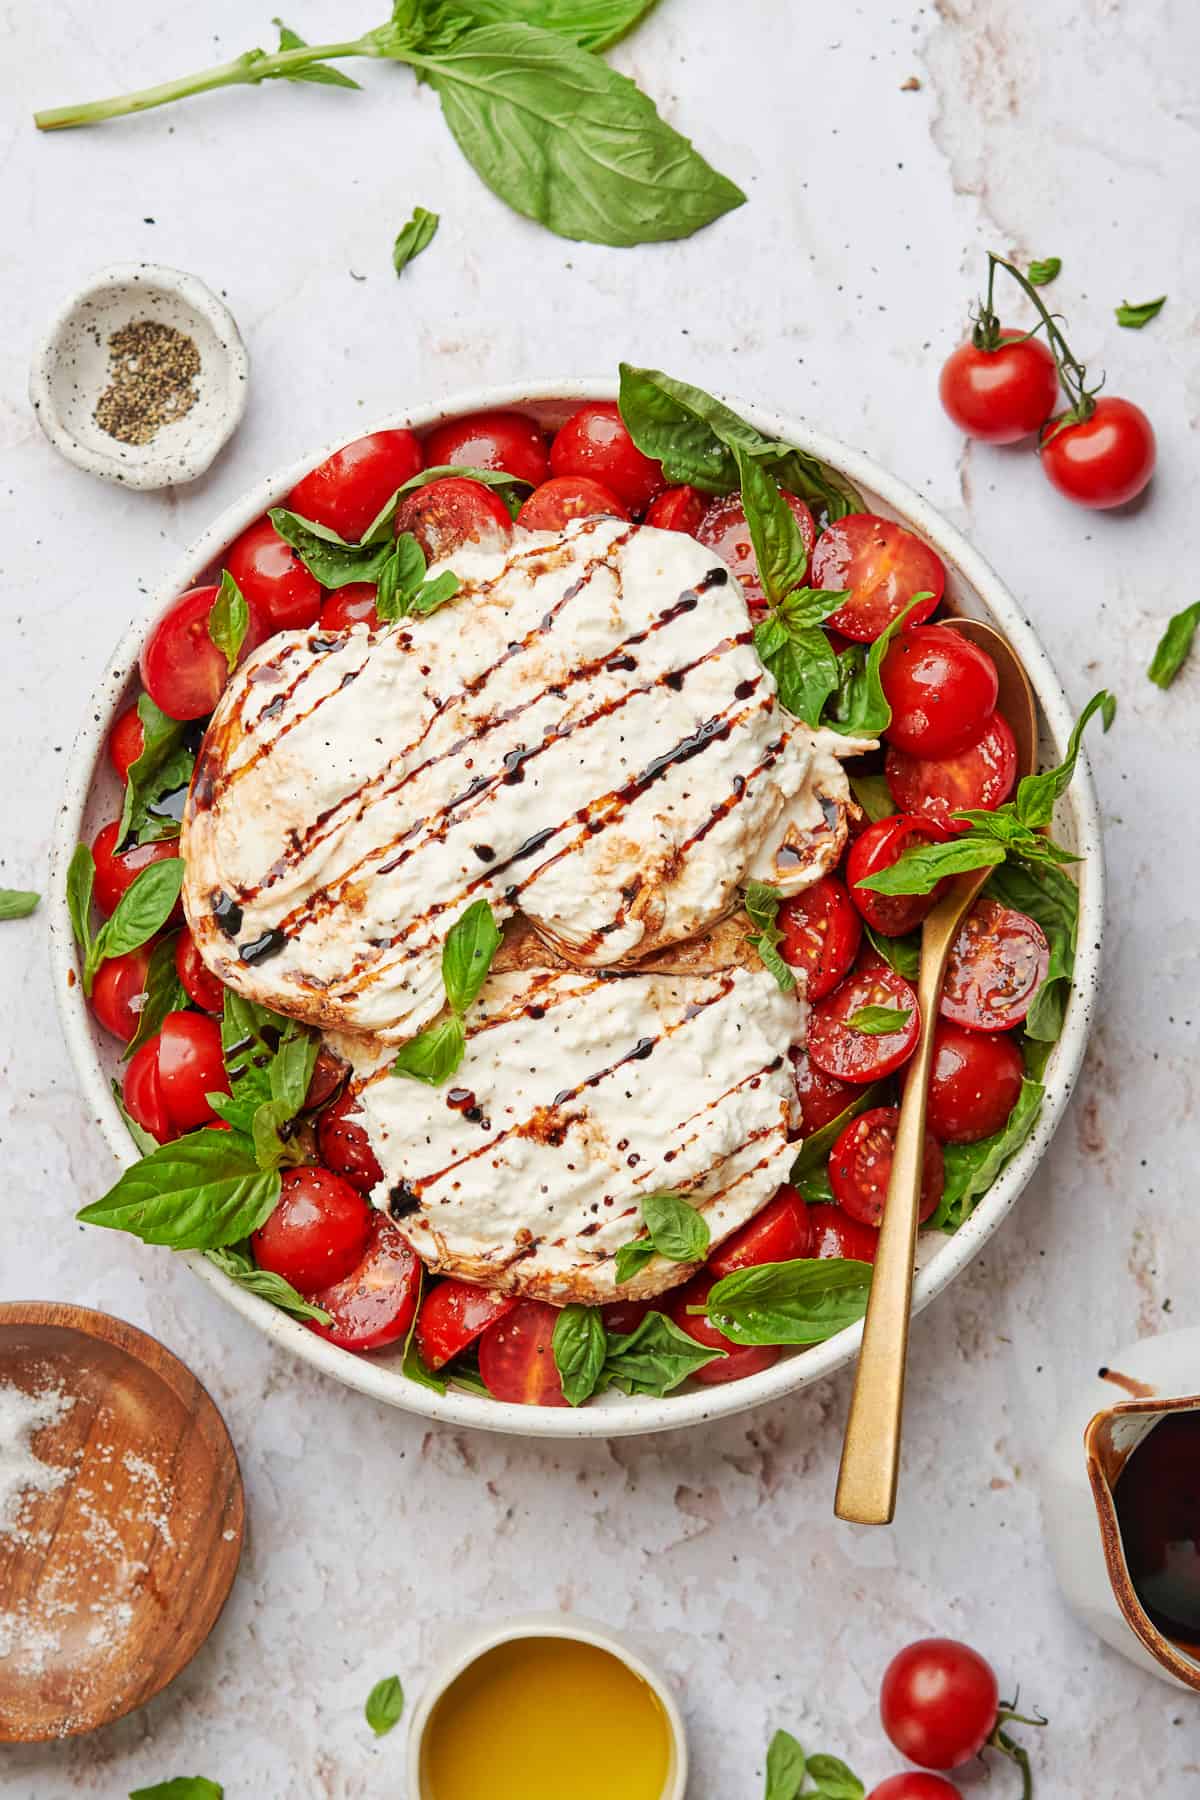 Burrata caprese salad with a basalmic reduction on top and surrounded by various ingredients.